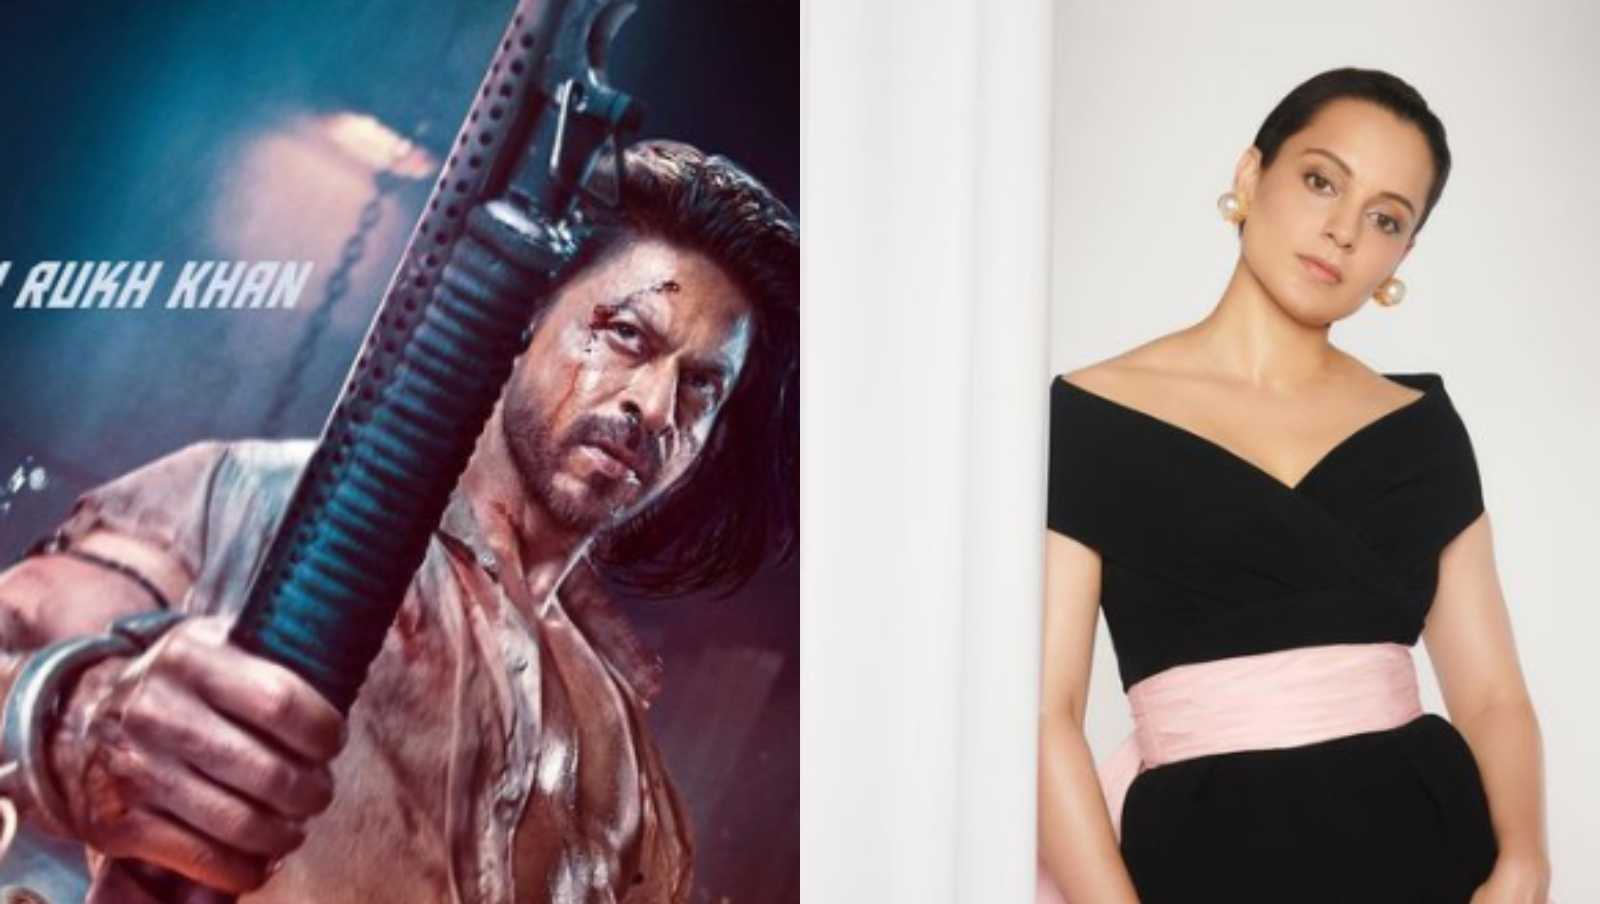 'Pathaan’s single day earning is more than your life time earnings' : Netizens react to Kangana Ranaut's subtle dig at Shah Rukh Khan's film